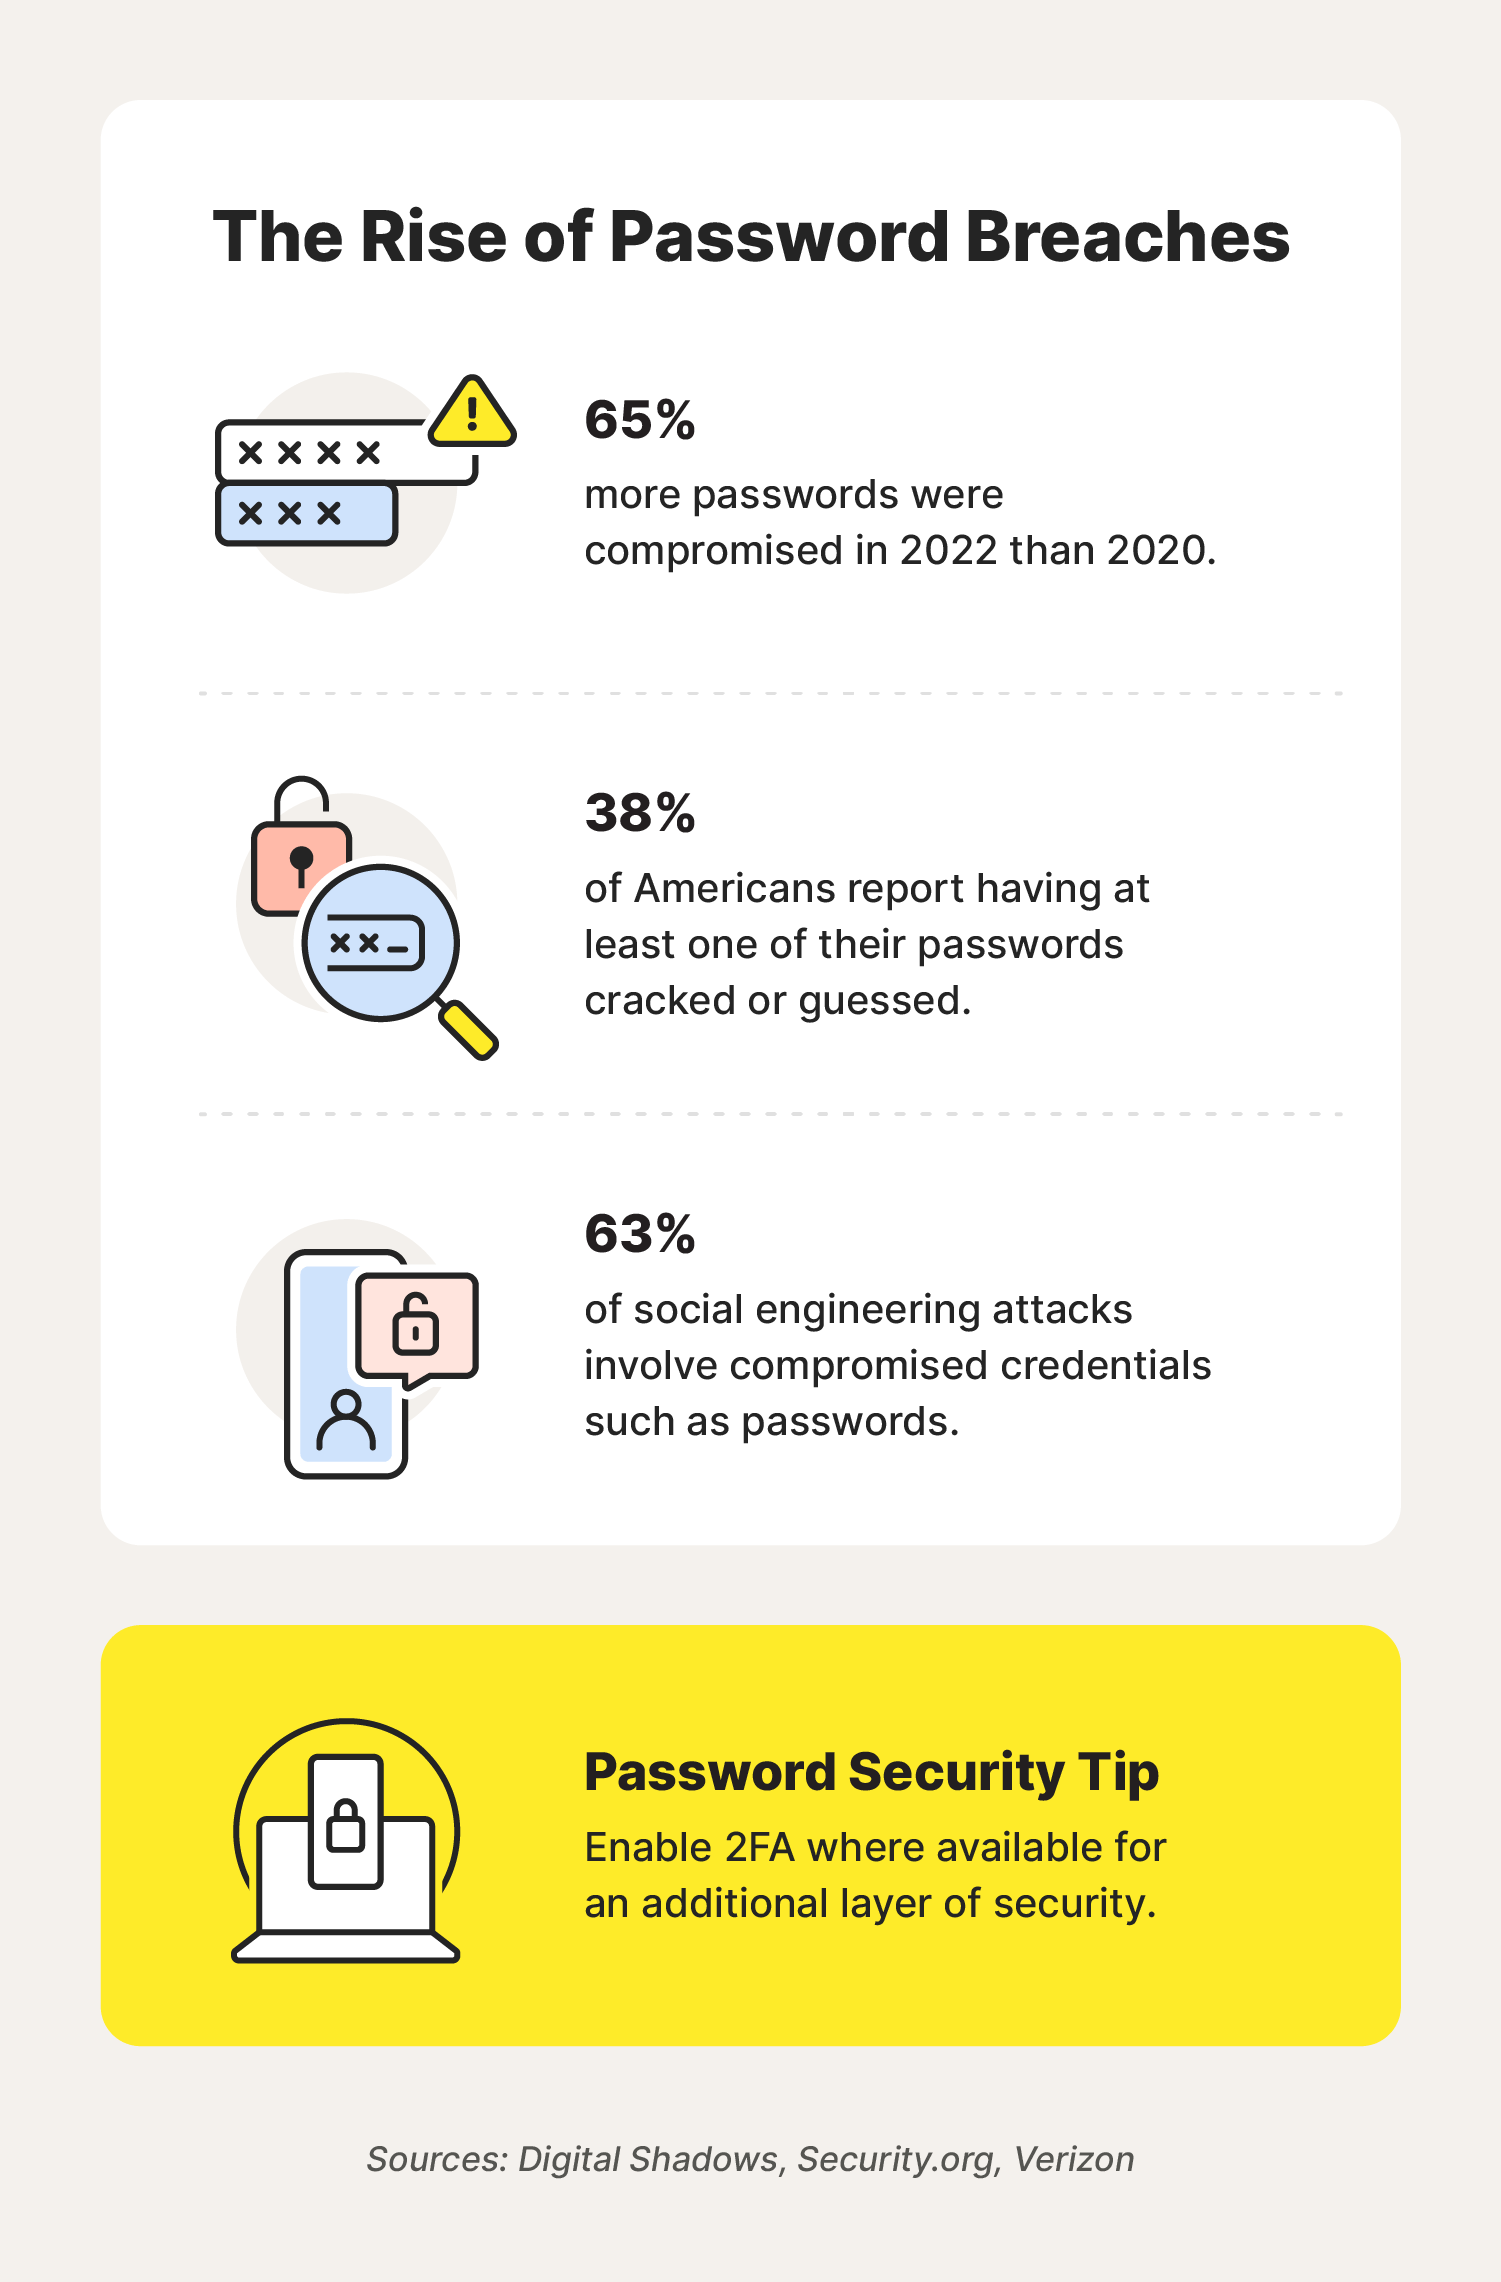 A graphic showcases the rise of password breaches by featuring password statistics related to cyberattacks and data breaches.